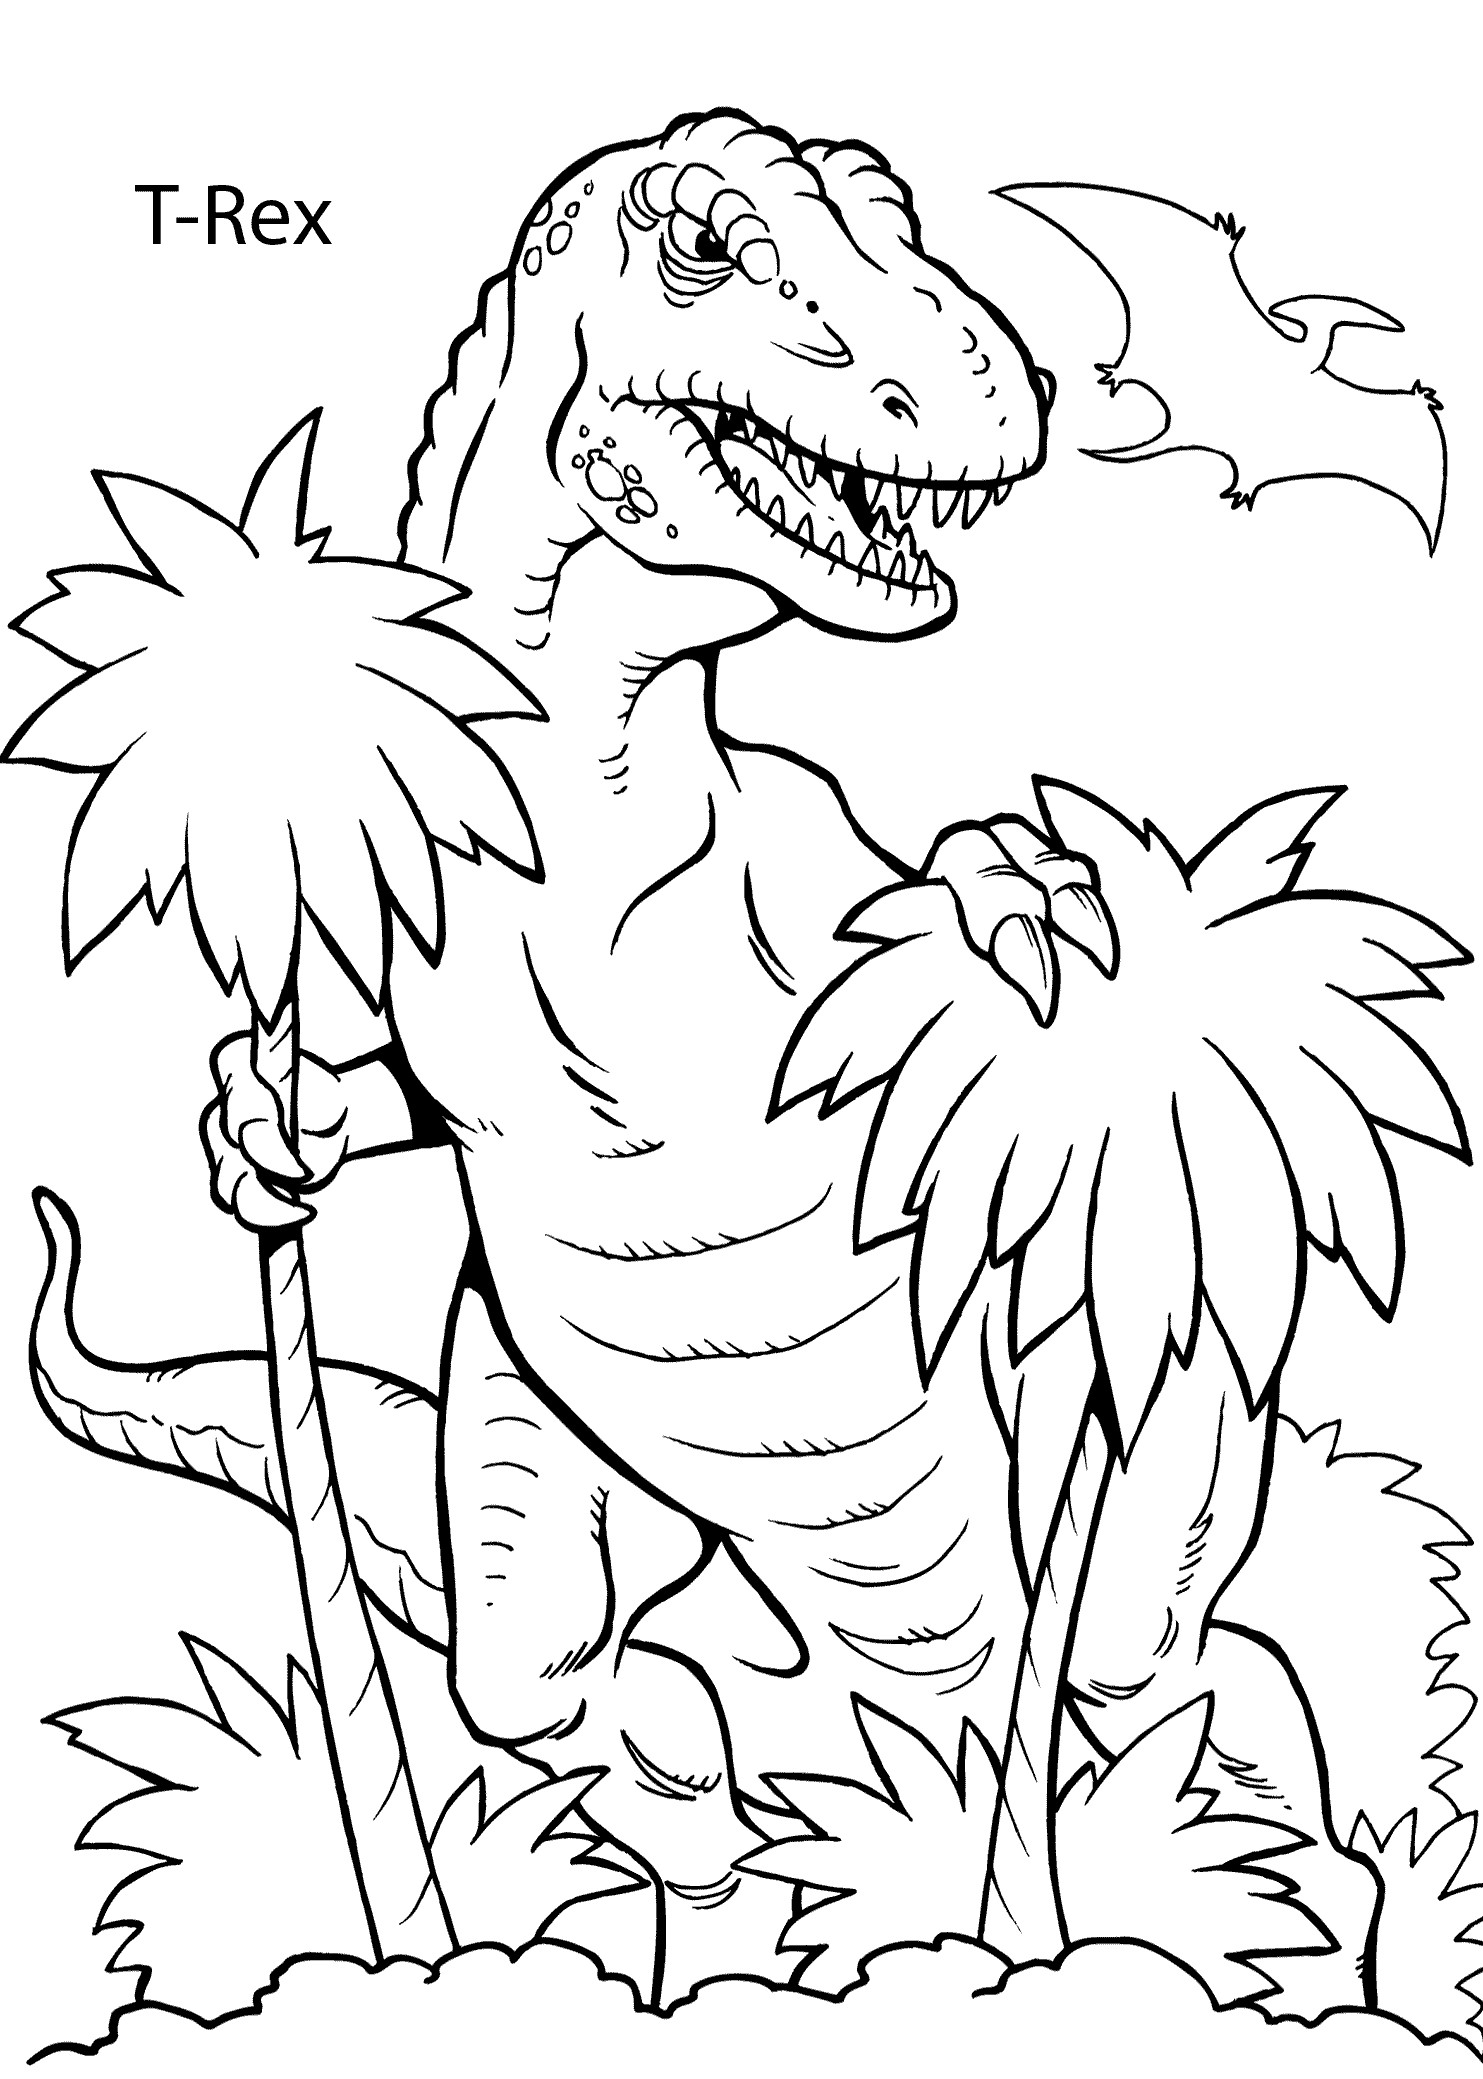 Kids Dinosaur Coloring Pages
 T Rex dinosaur coloring pages for kids printable free